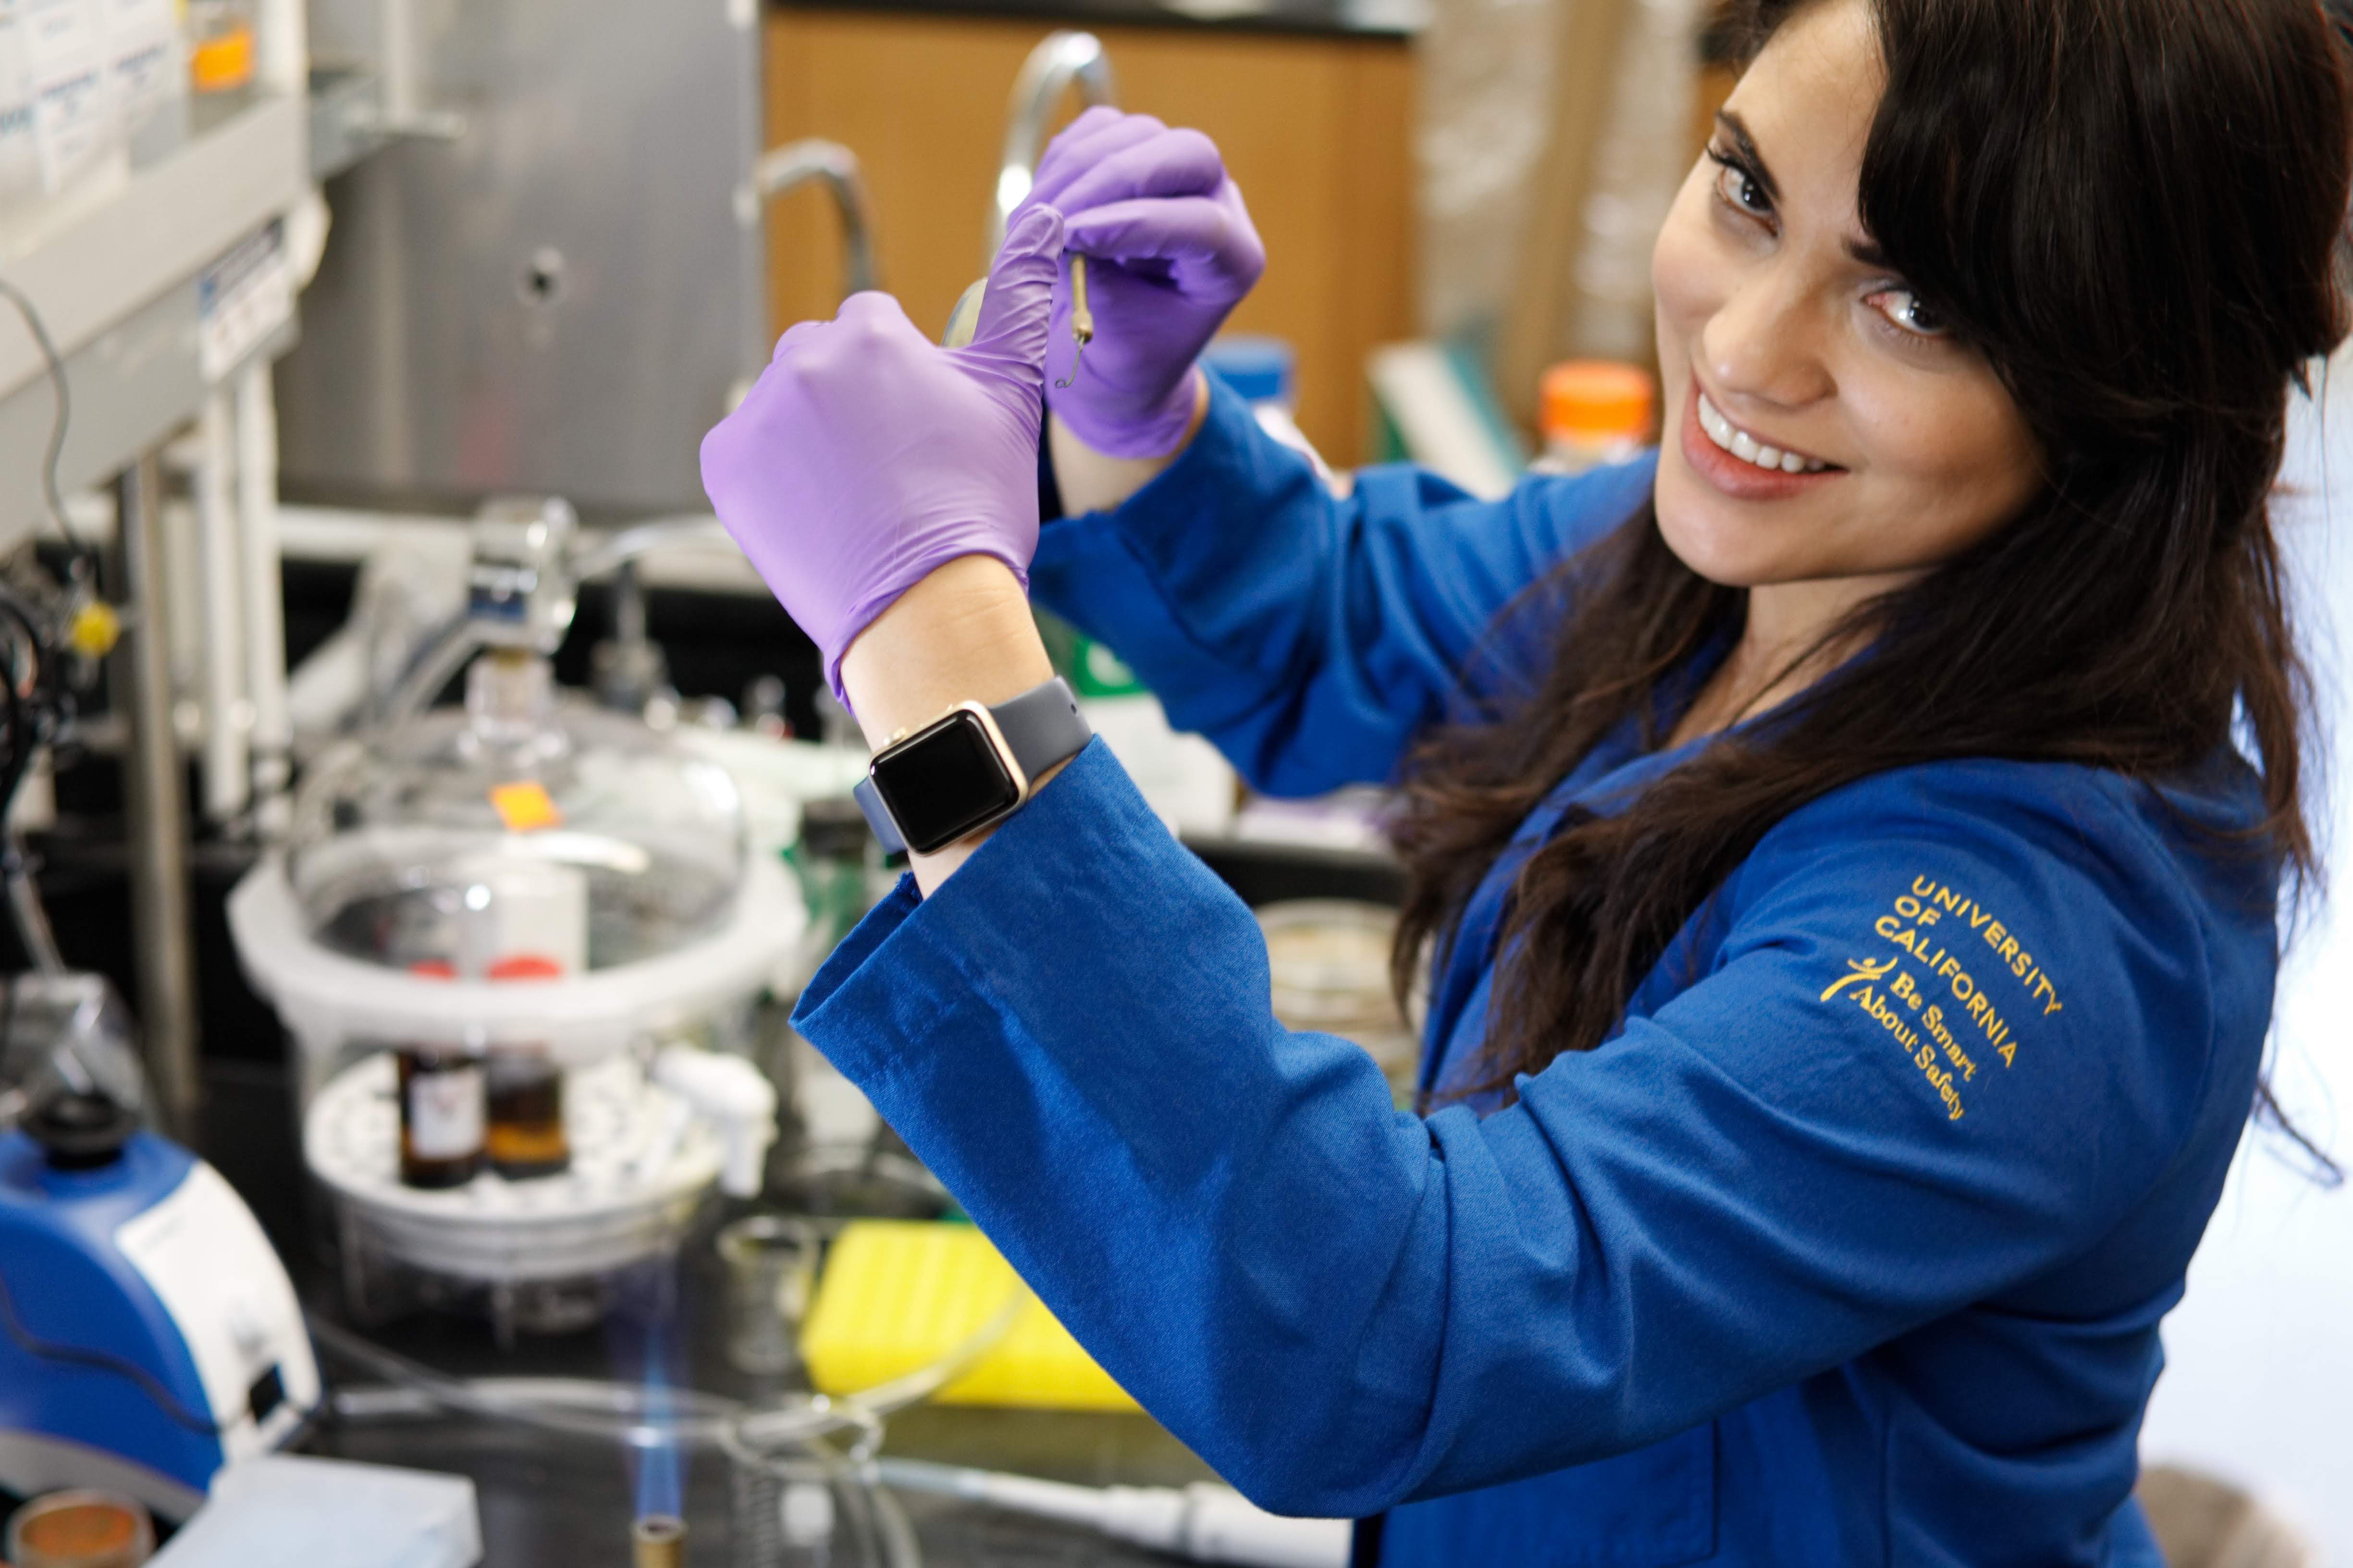 Smiling woman scientist working in lab wearing laboratory coat, latex gloves, and an Apple watch.